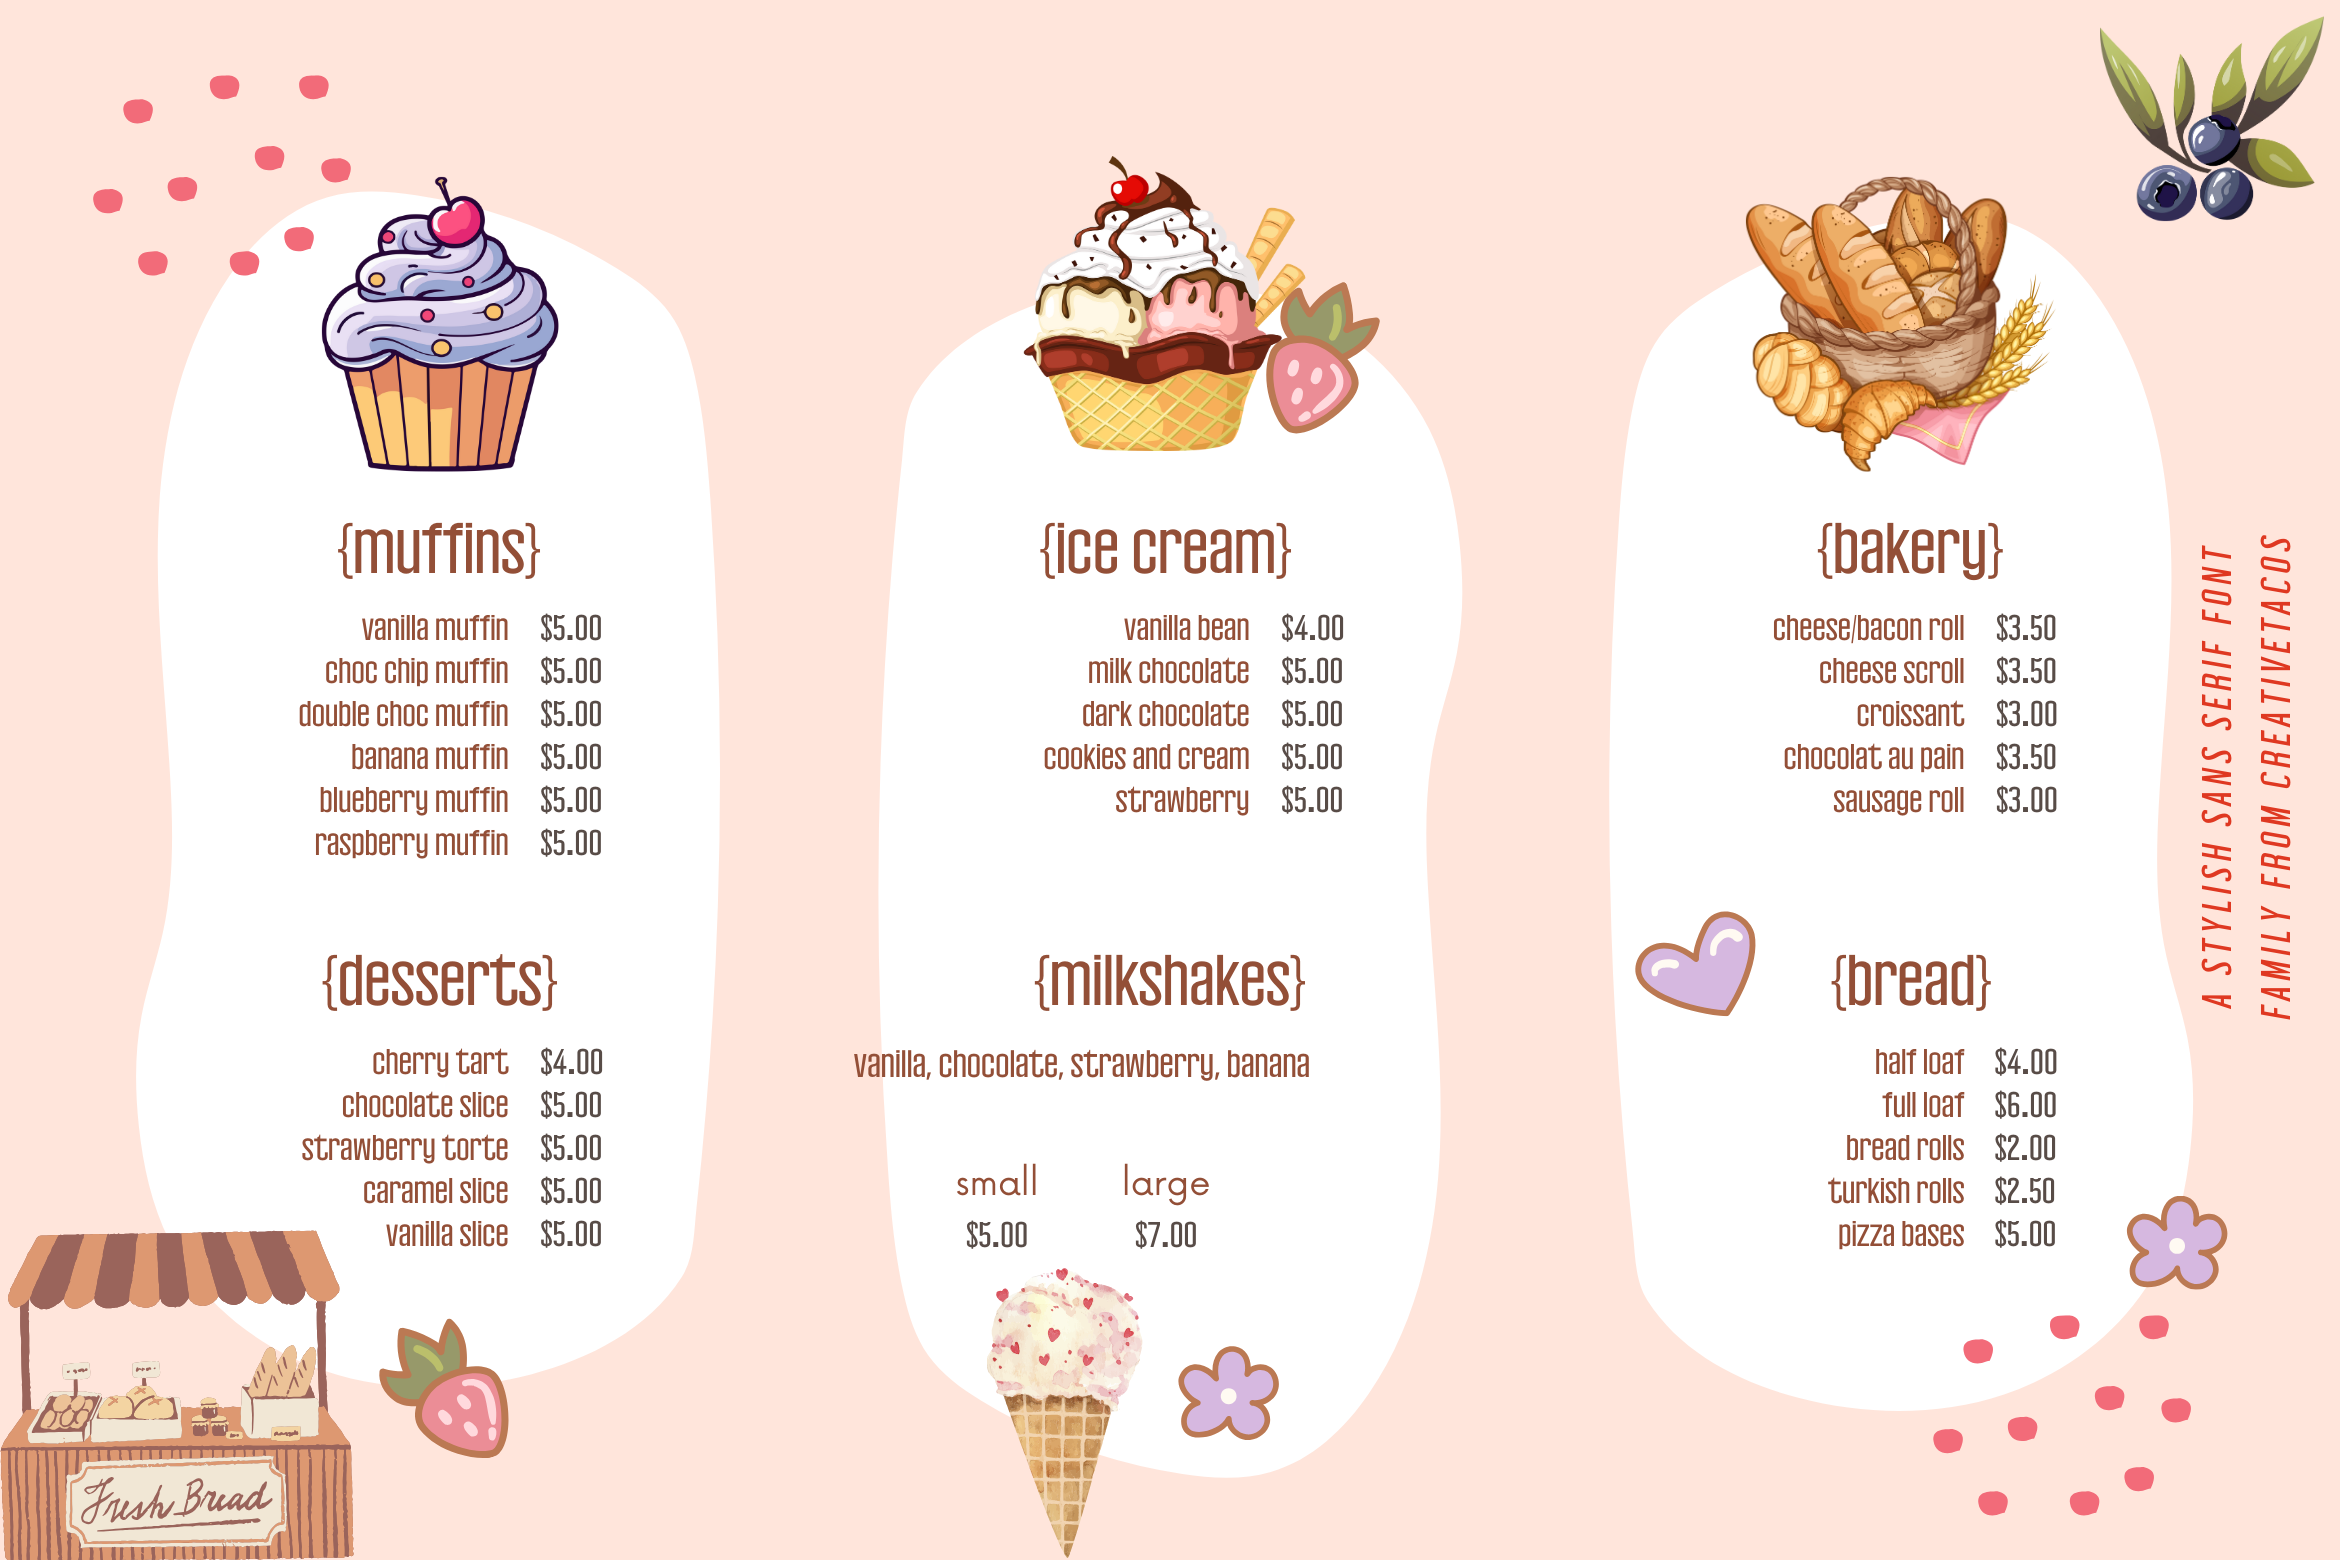 Pink menu with prices and drawings of muffins, ice cream, and bread, all labeled in Wellston font.